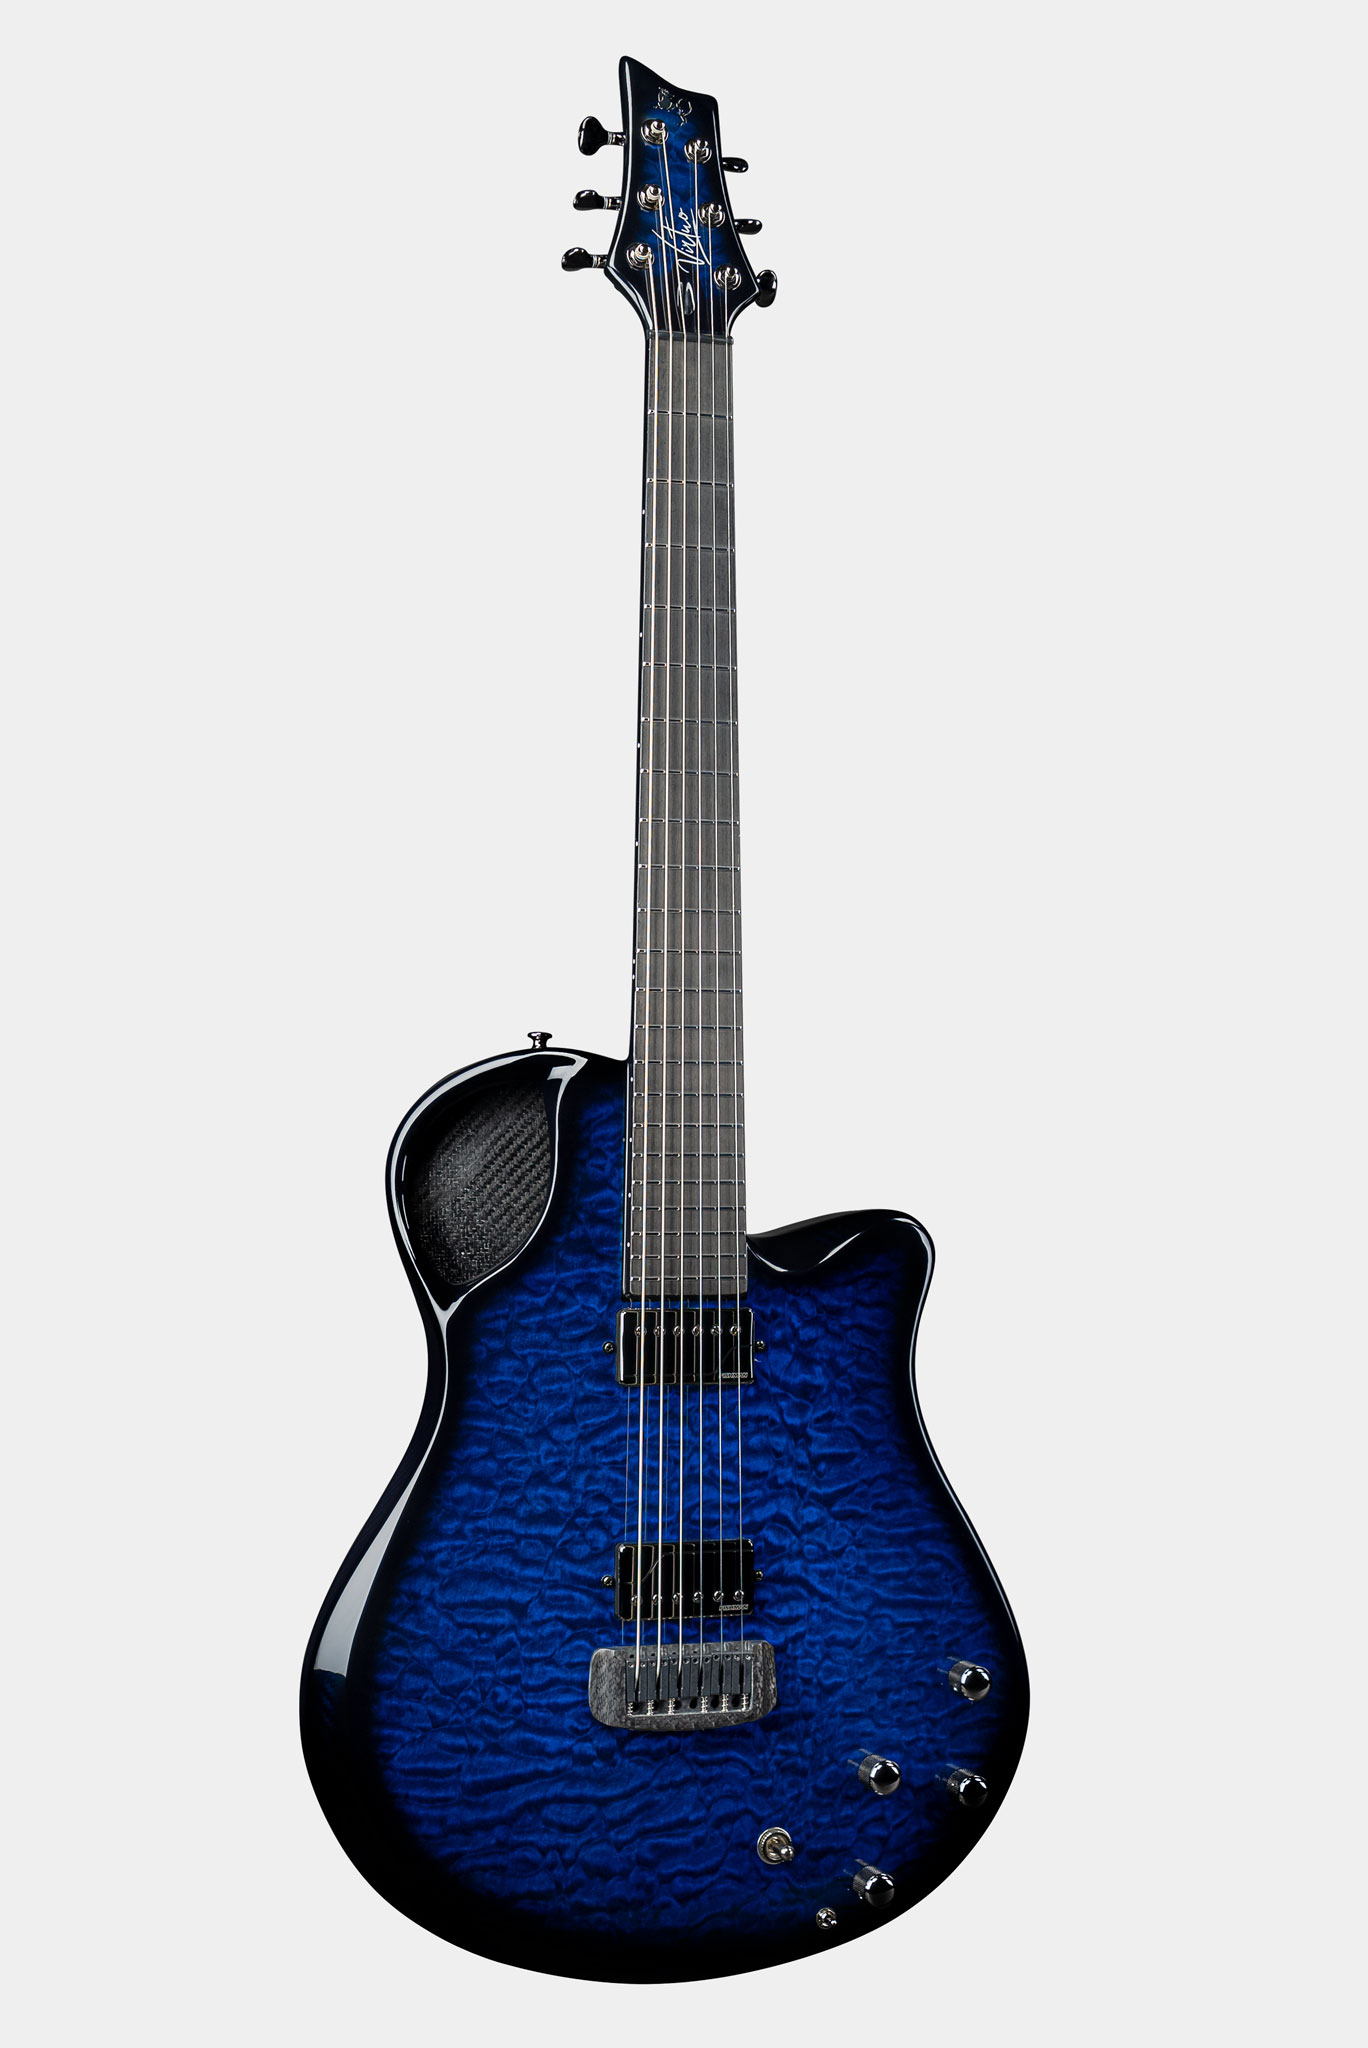 Emerald Virtuo Carbon Fiber Guitar in Blue Quilted Maple